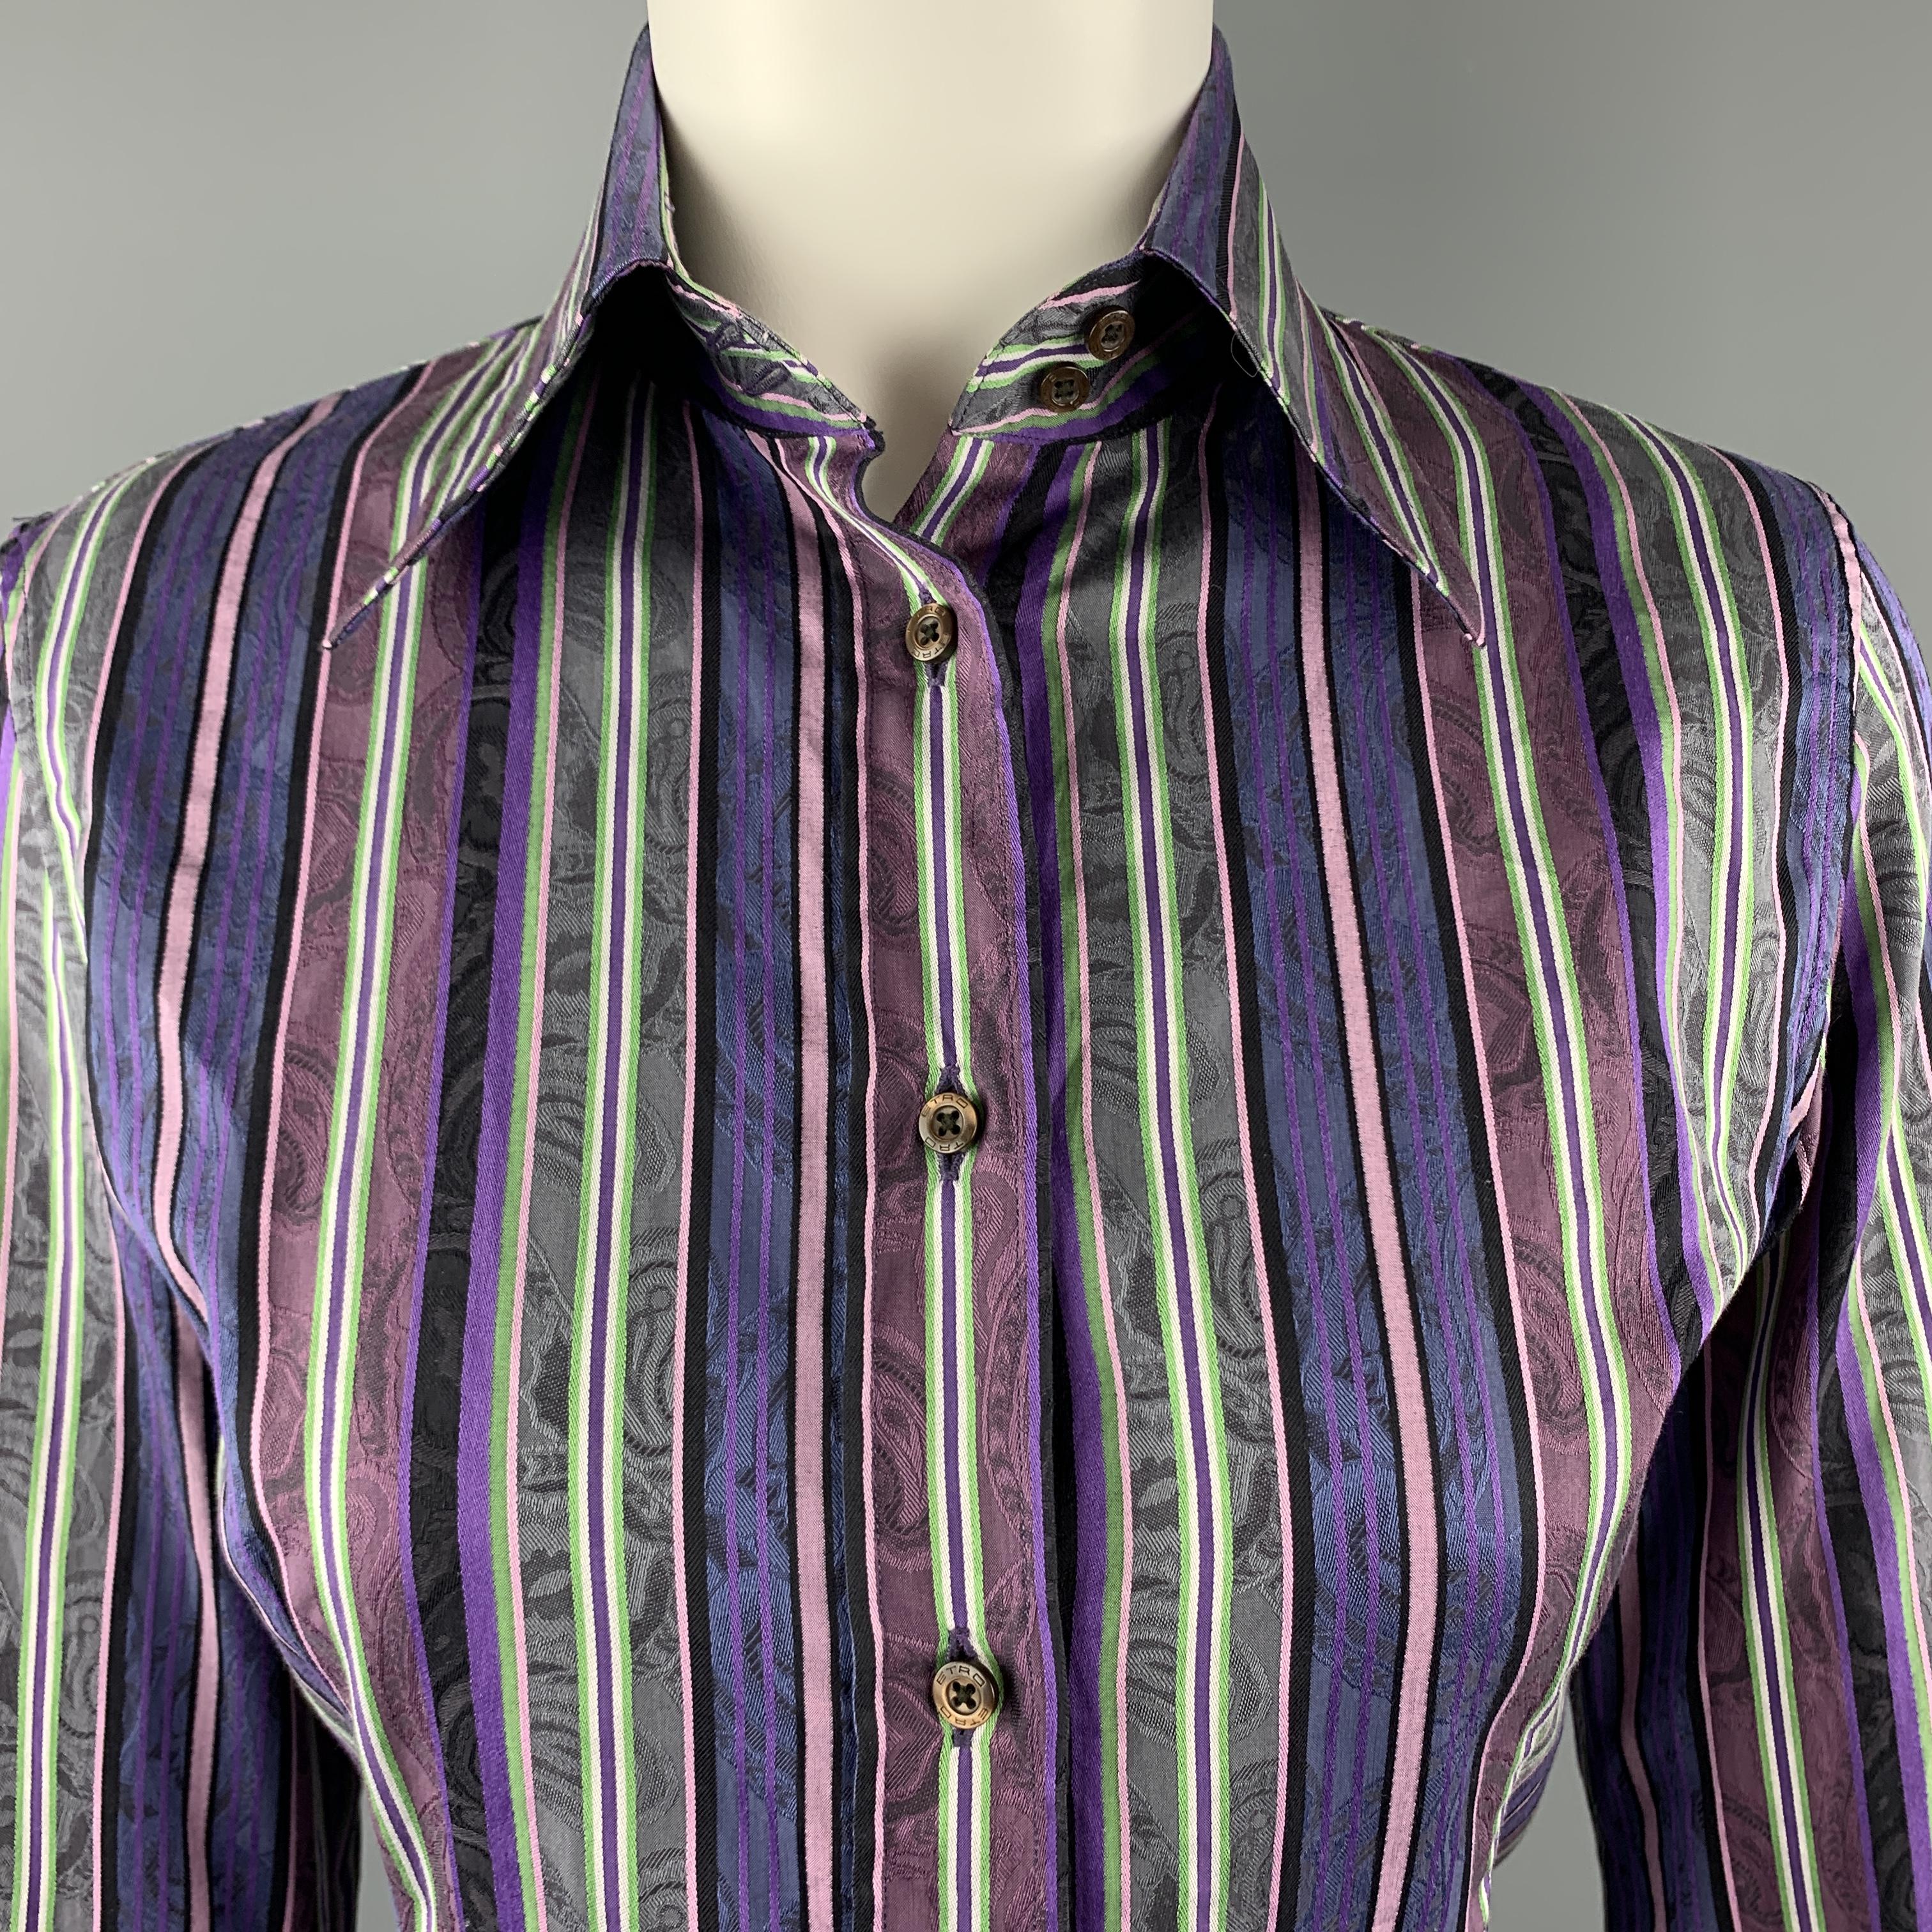 ETRO blouse comes in purple and green printed striped cotton with a pointed collar and button up front. Made in Italy.

Excellent Pre-Owned Condition.
Marked: IT 40

Measurements:

Shoulder: 15 in.
Bust: 38 in.
Sleeve: 23 in.
Length: 24 in.